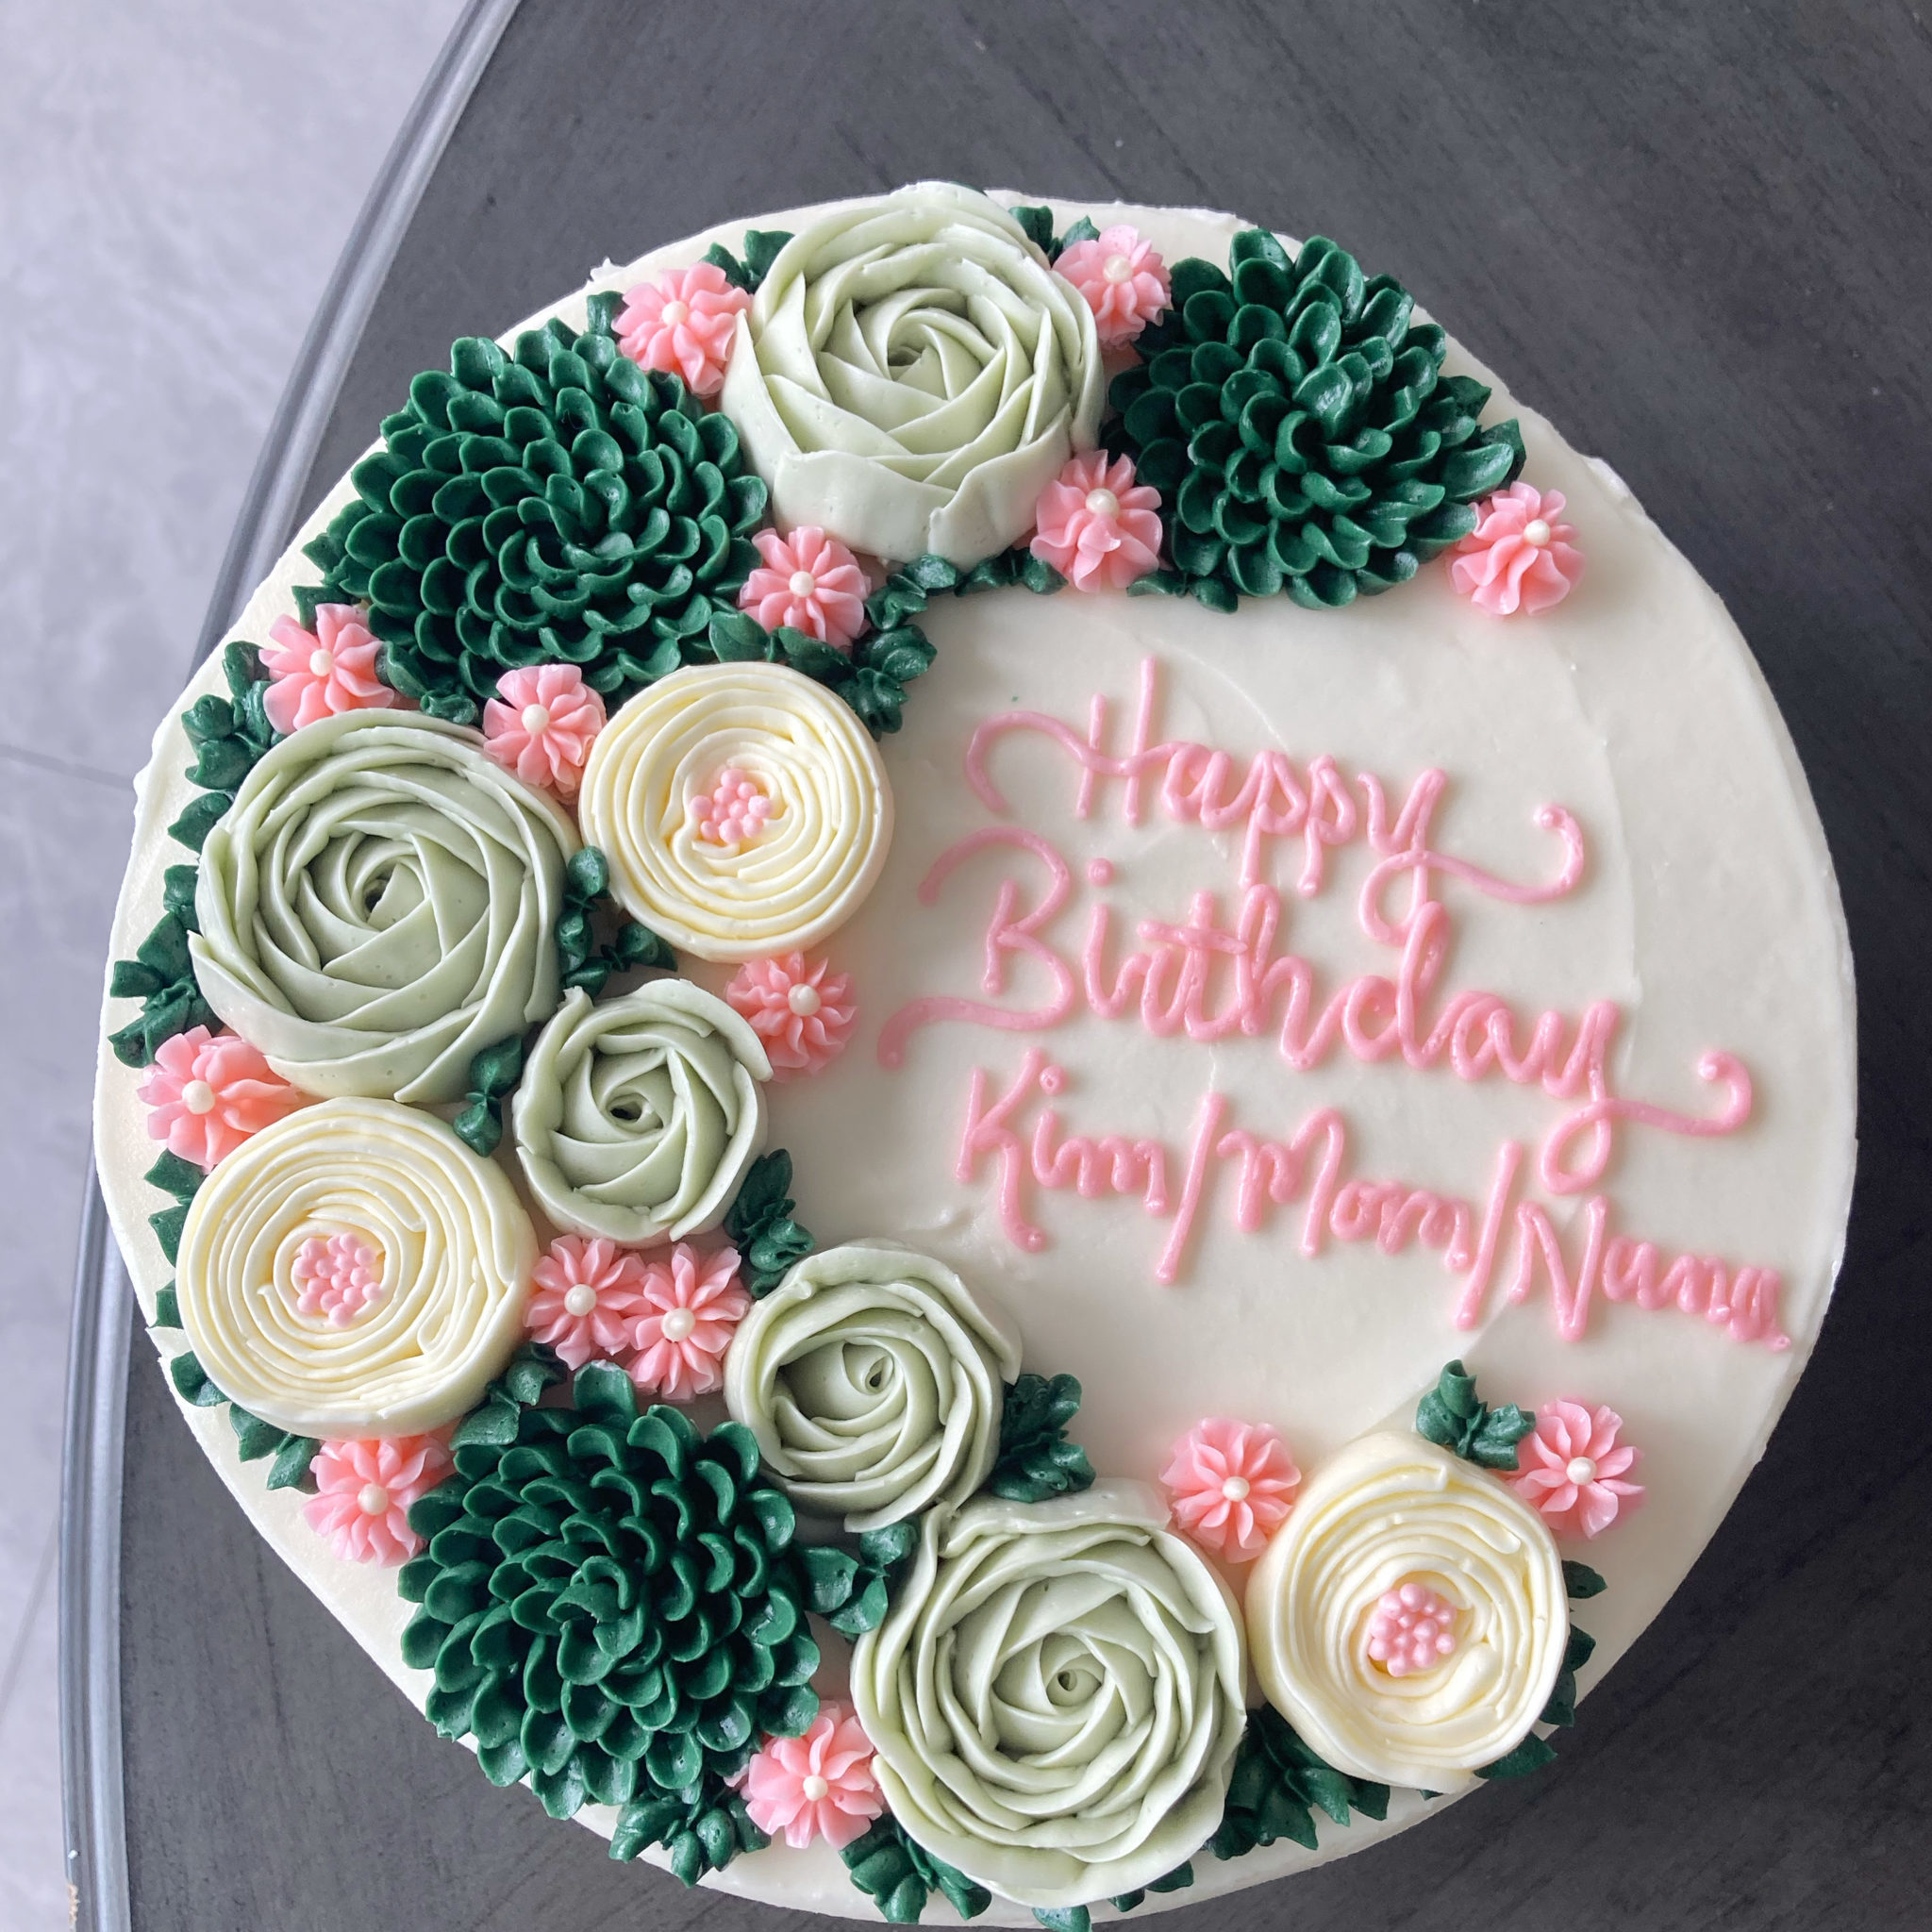 Happy birthday cake with floral spray